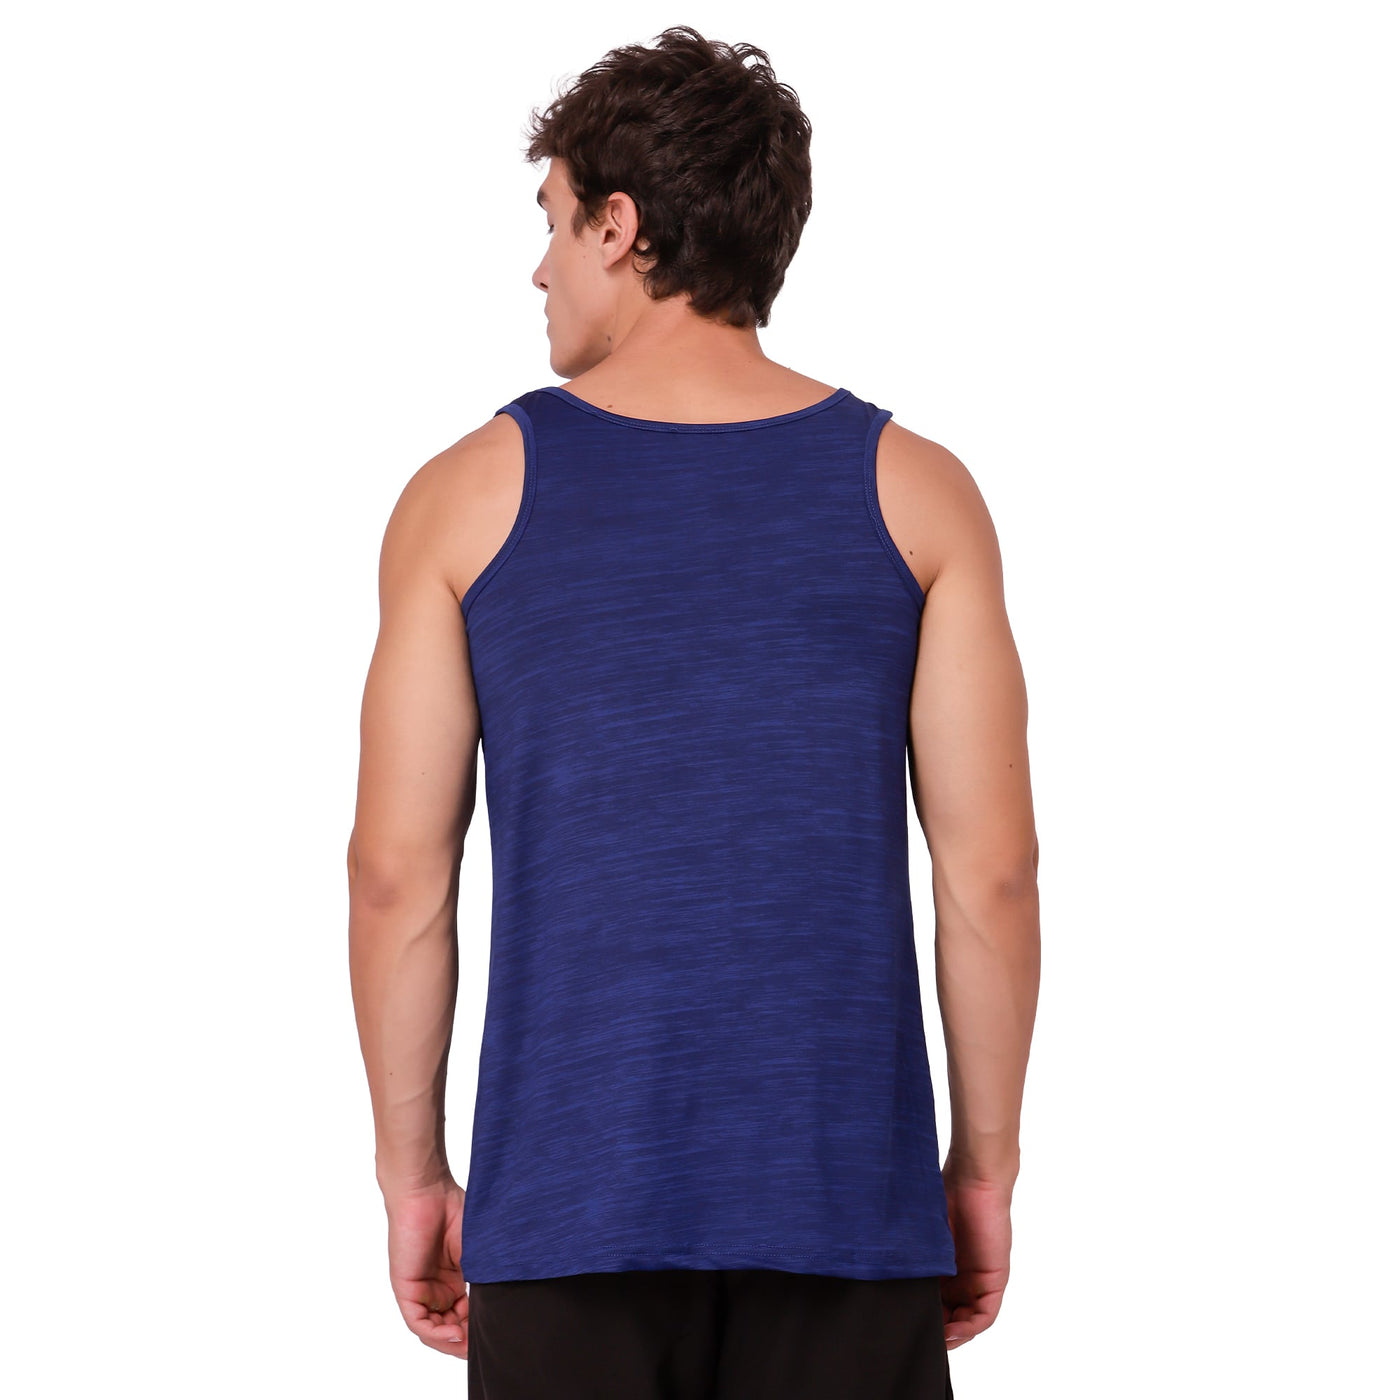 Workout Tank Top for Men